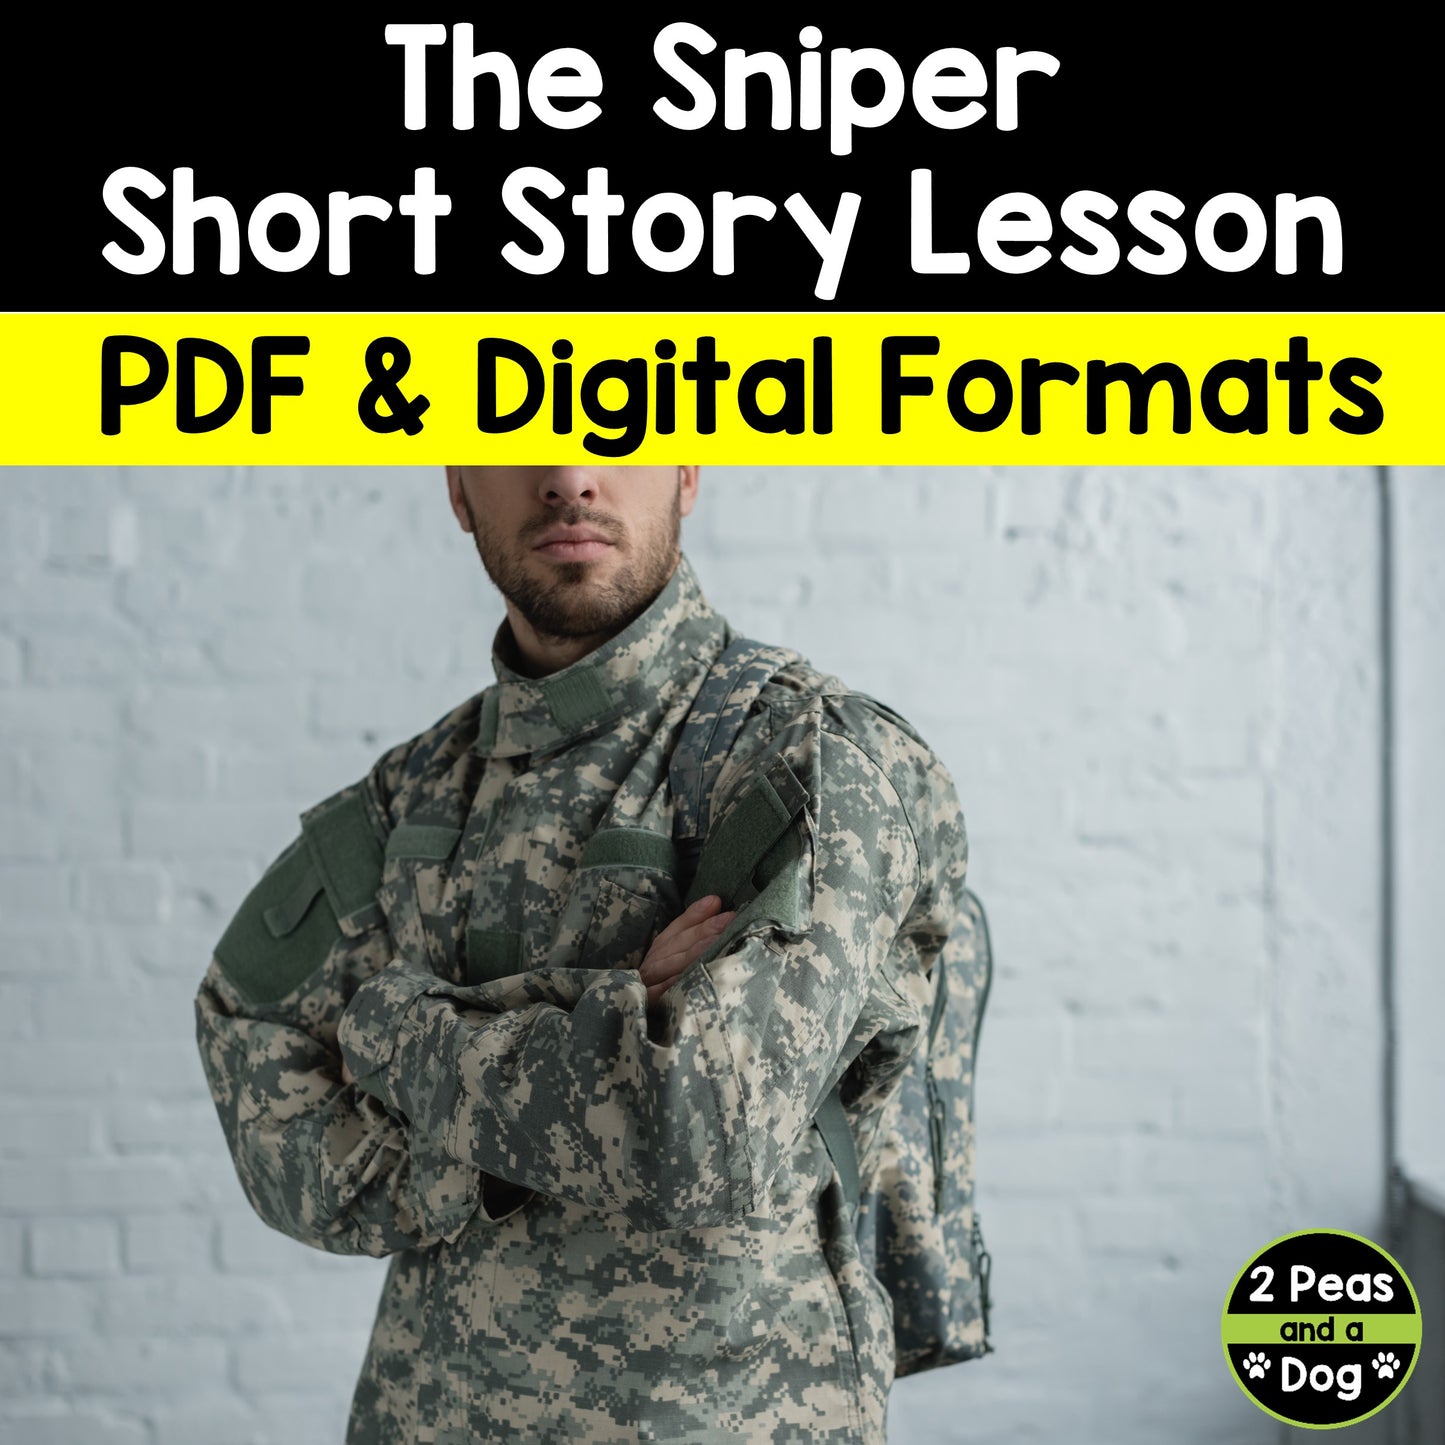 The Sniper Short Story Lesson